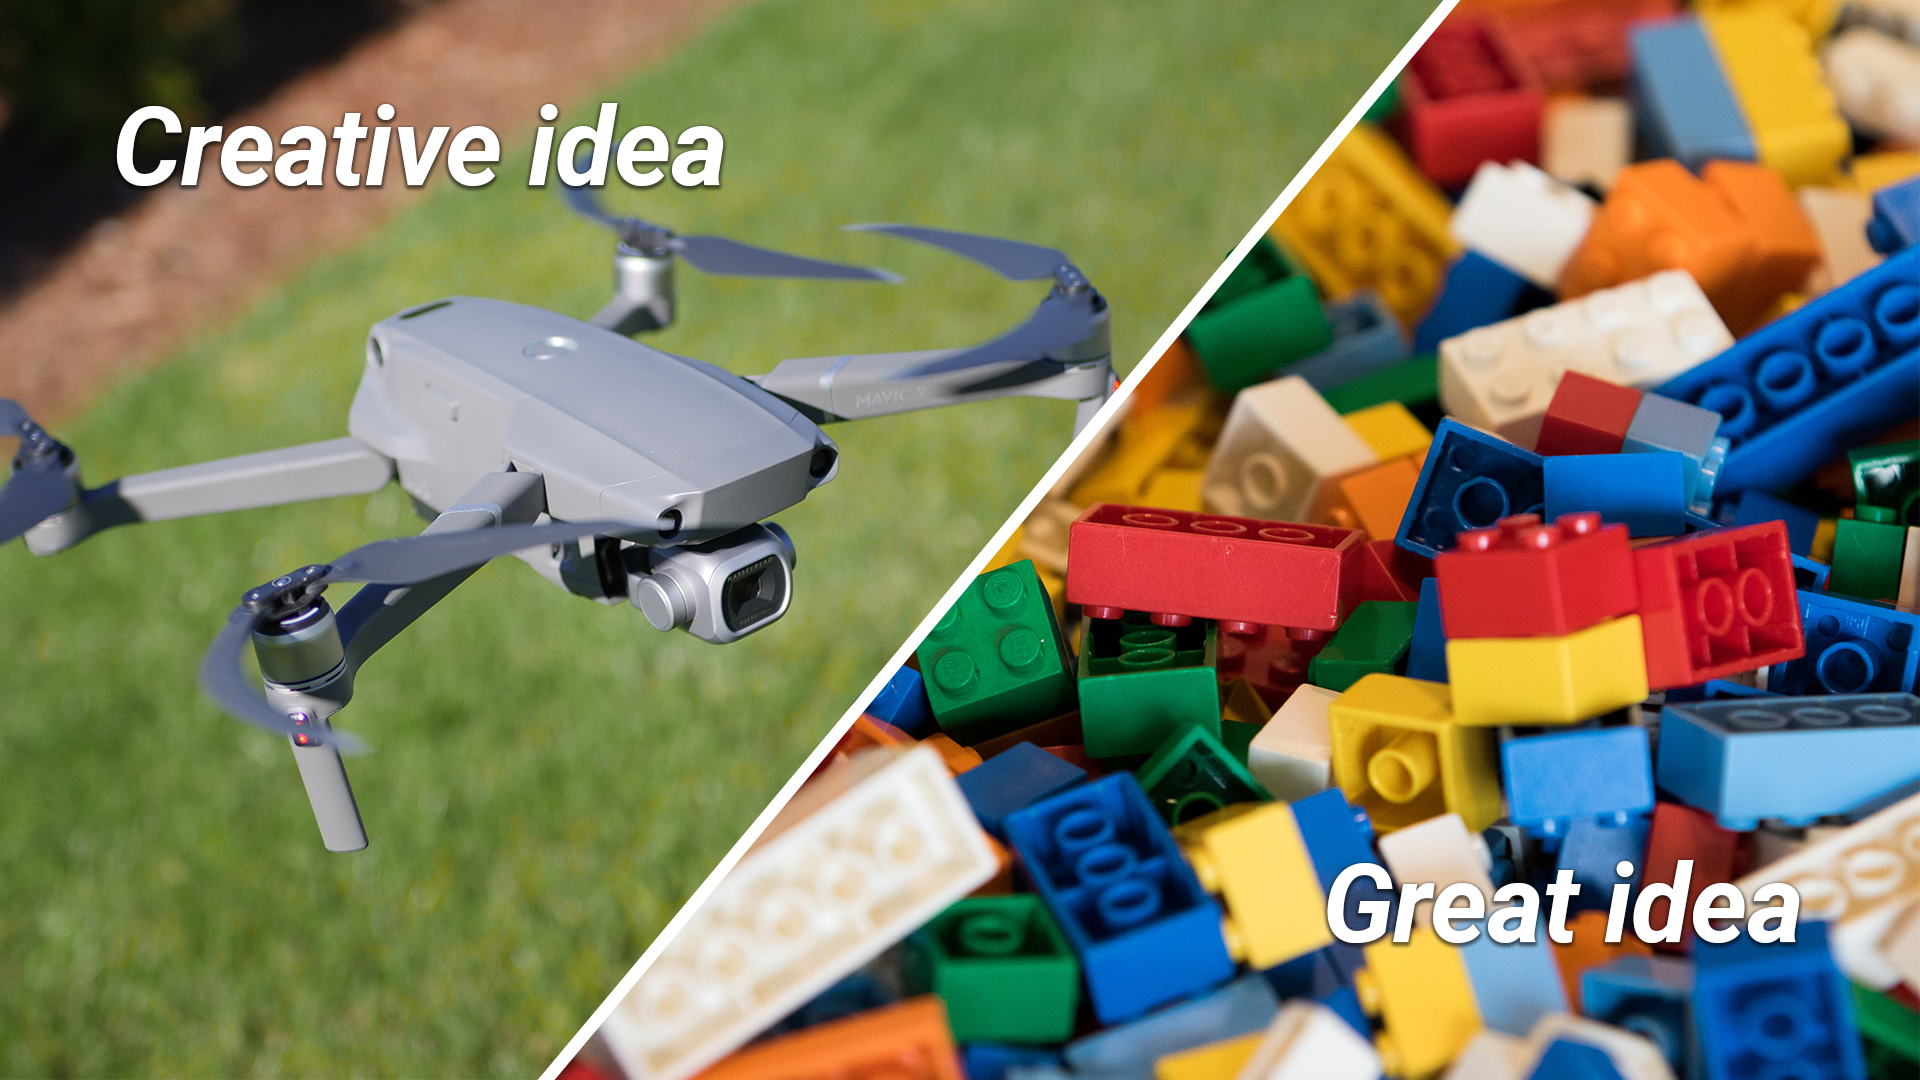 drones and lego